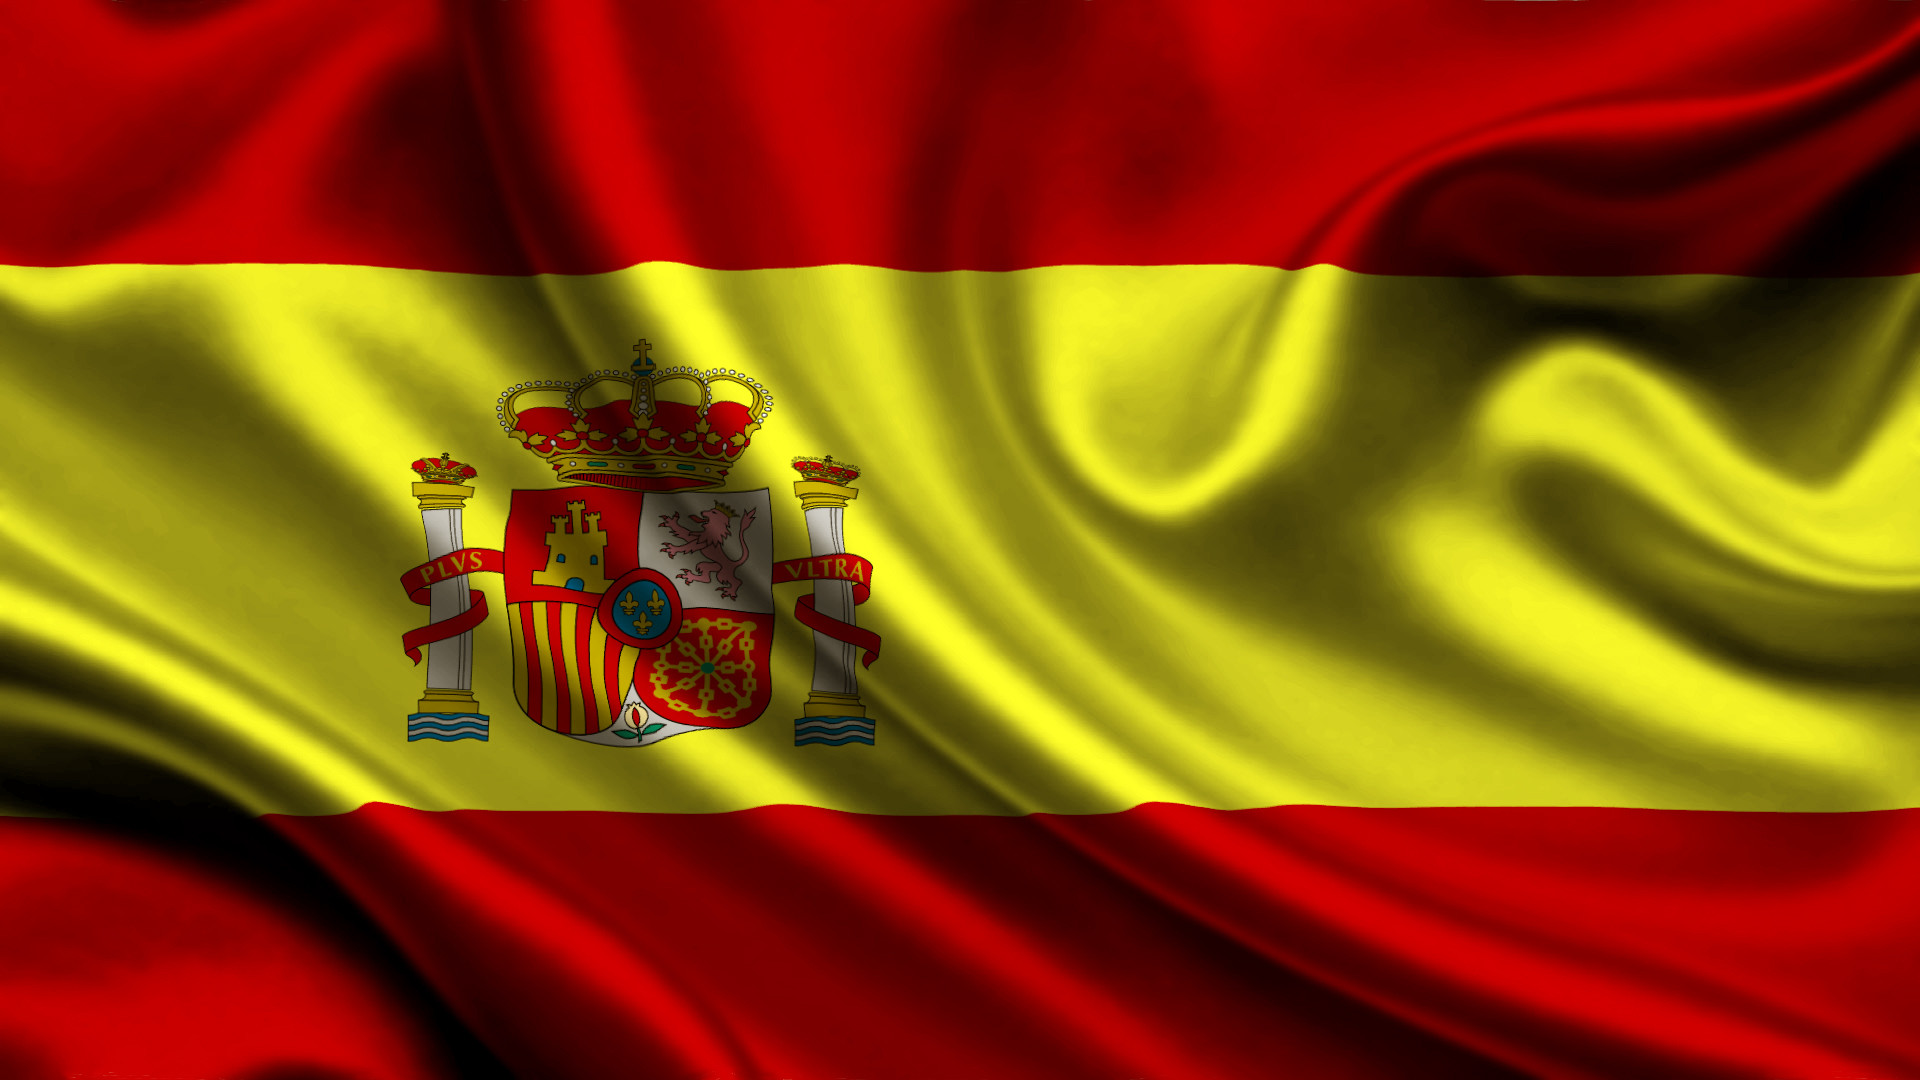 1920x Spain Flag Wallpaper Image Picture Data